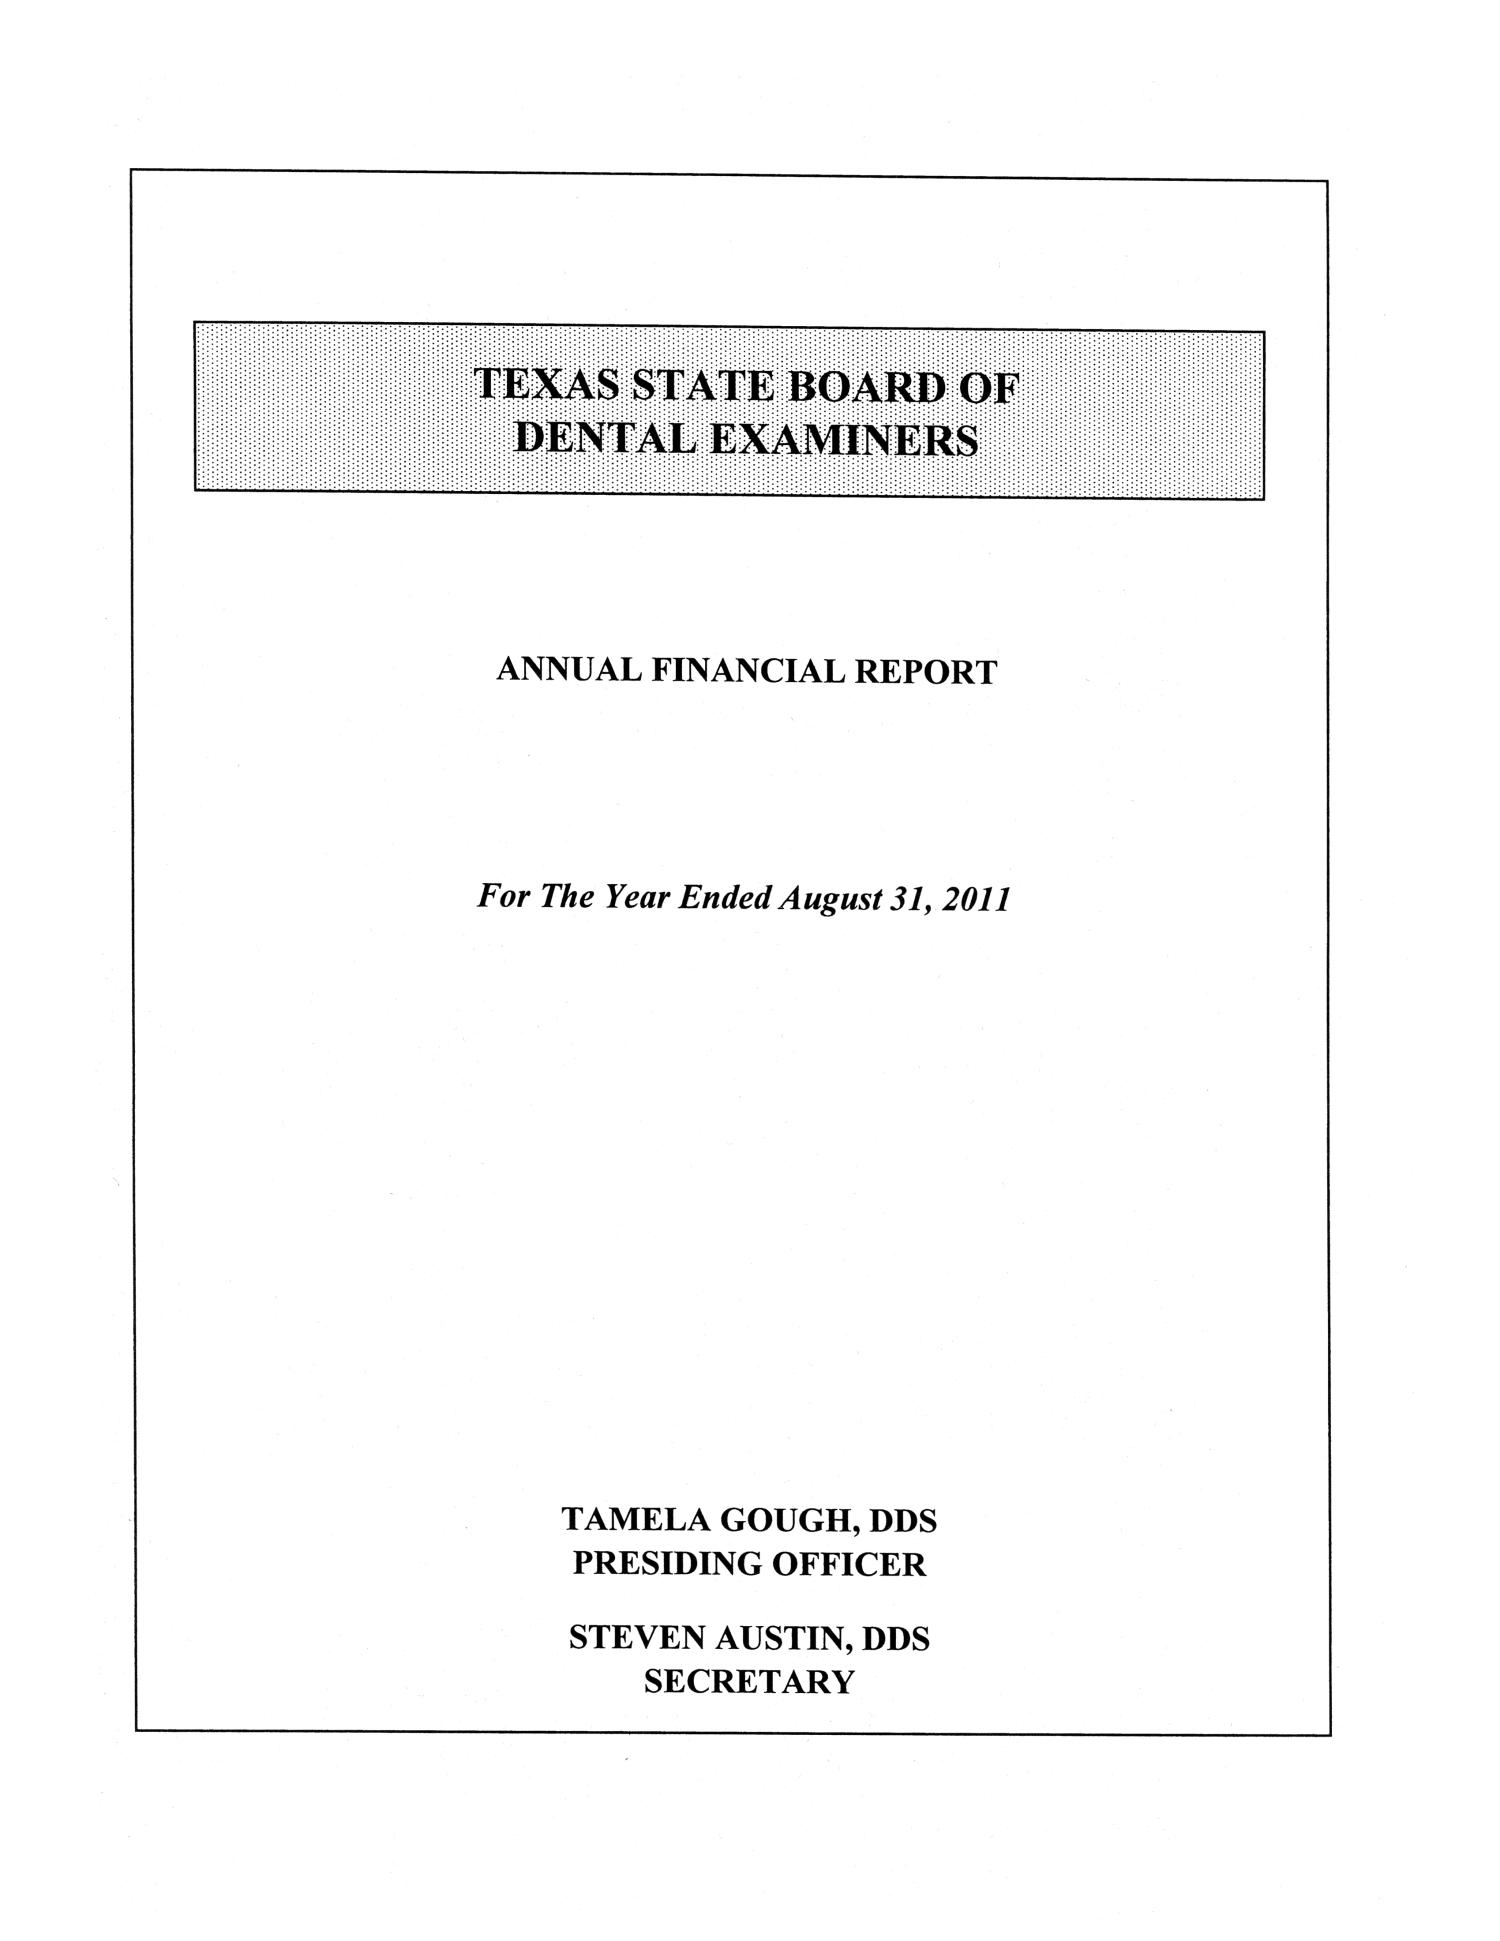 Texas state board of dental examiners jobs